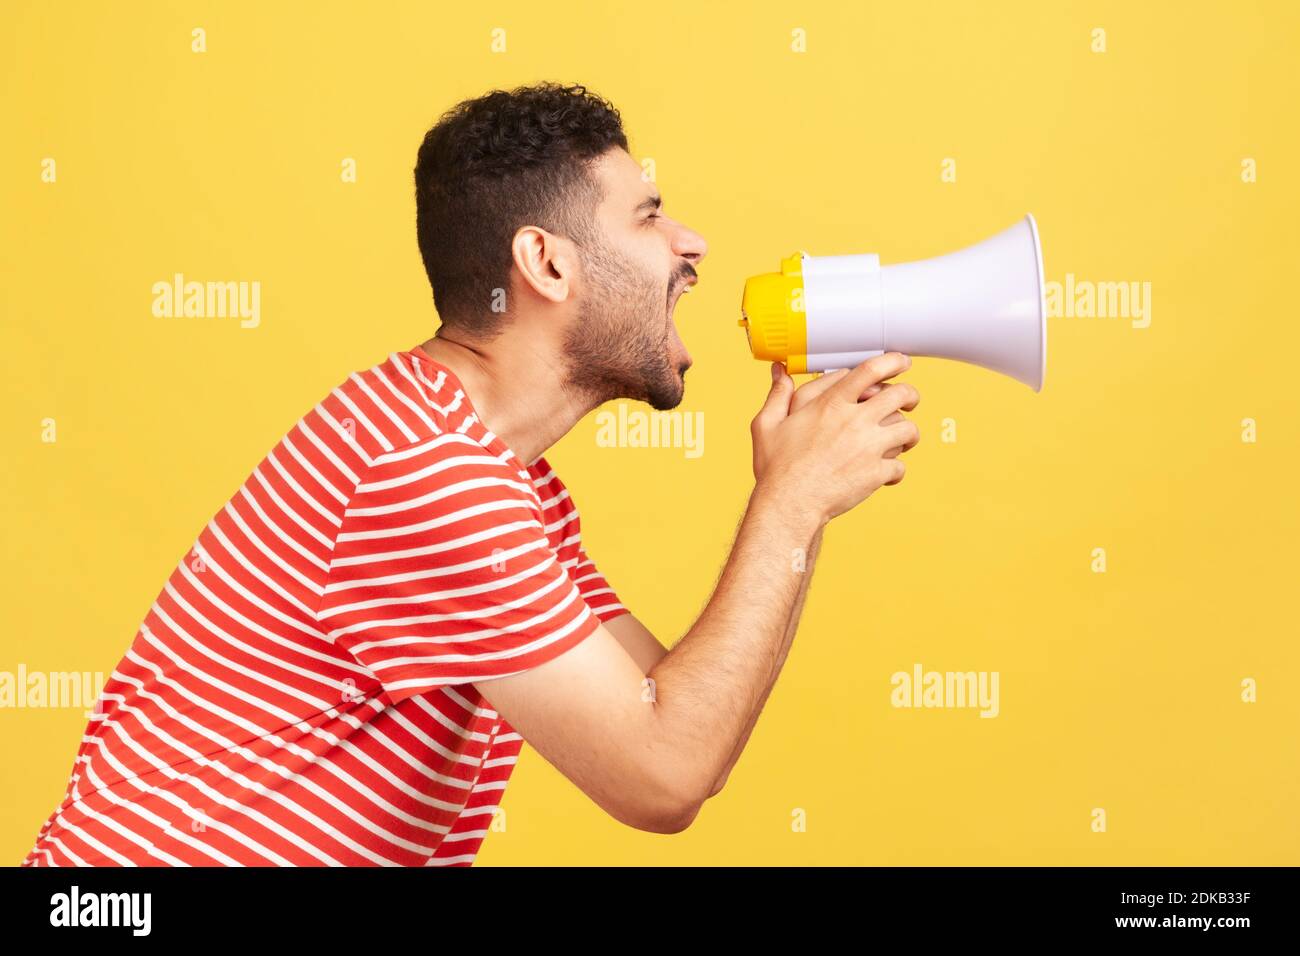 Profile portrait nervous bearded man in striped t-shirt loudly speaking screaming holding megaphone, announcing important message. Indoor studio shot Stock Photo